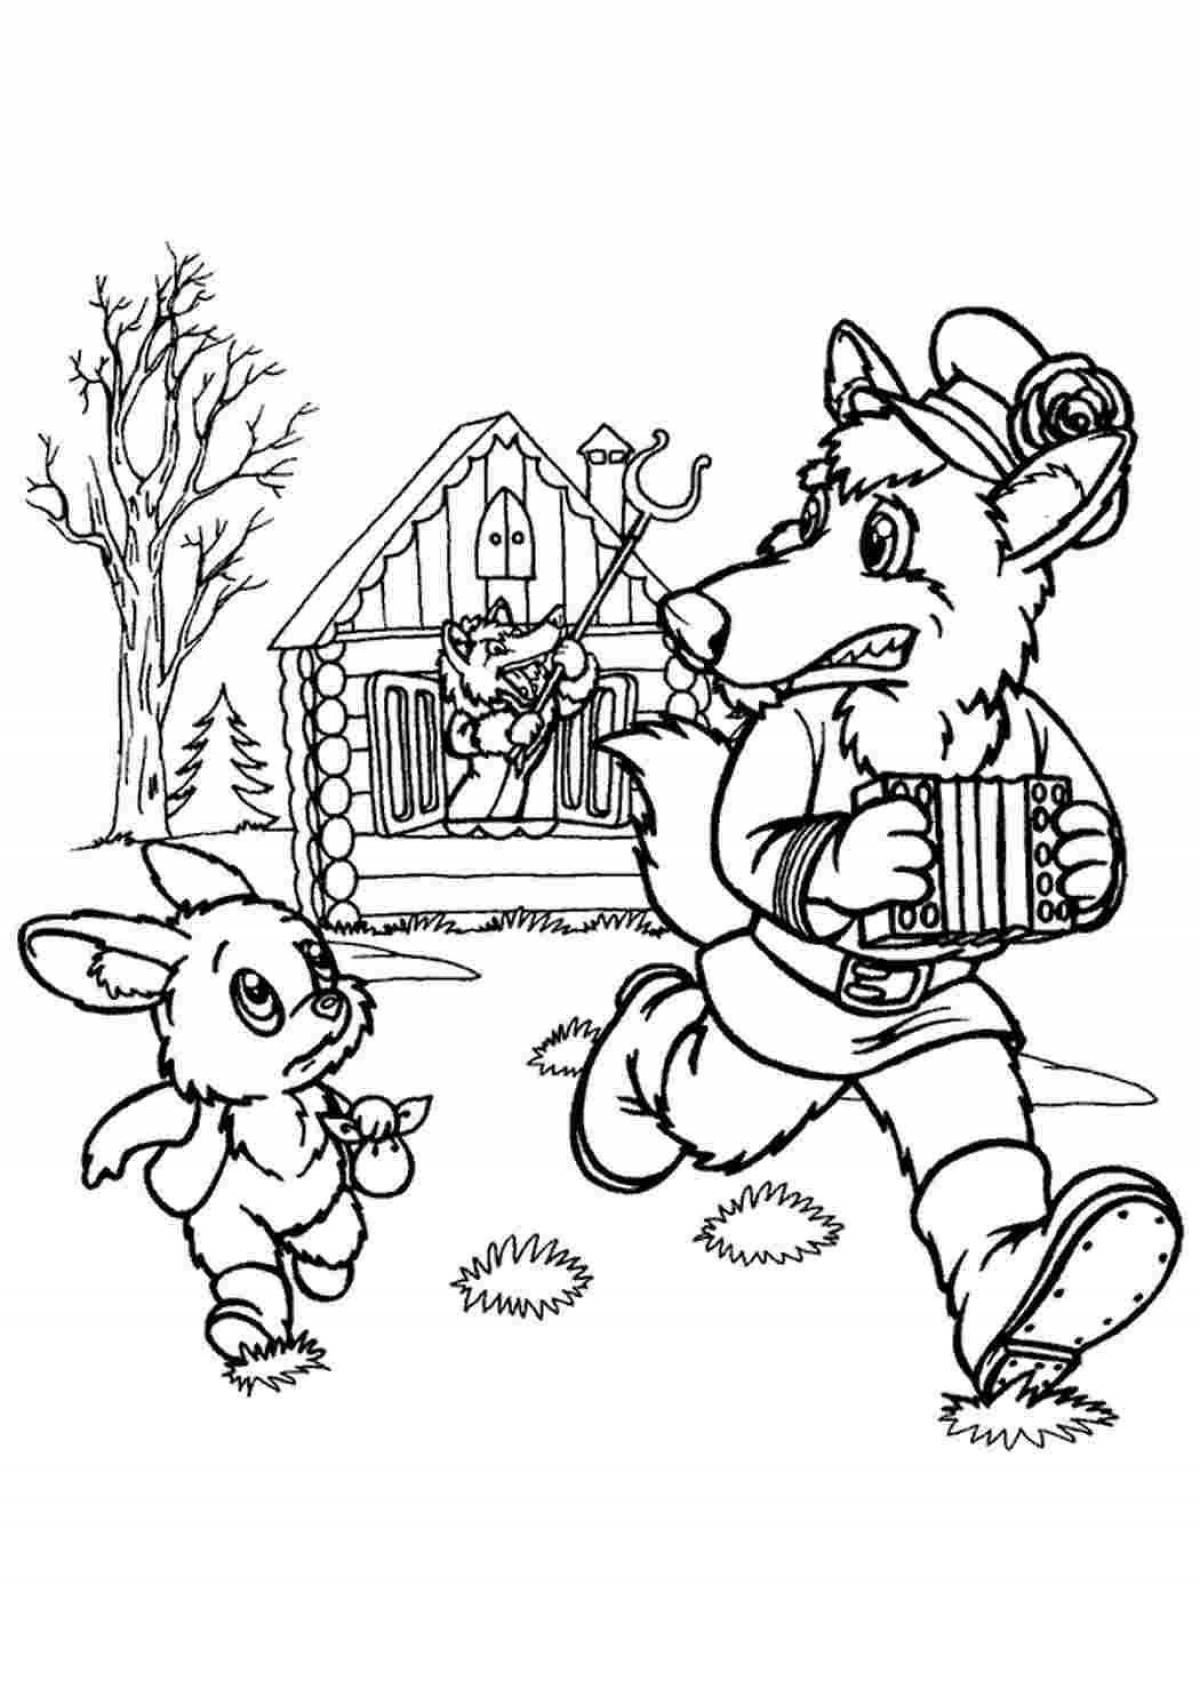 Colorful fox and hare coloring page